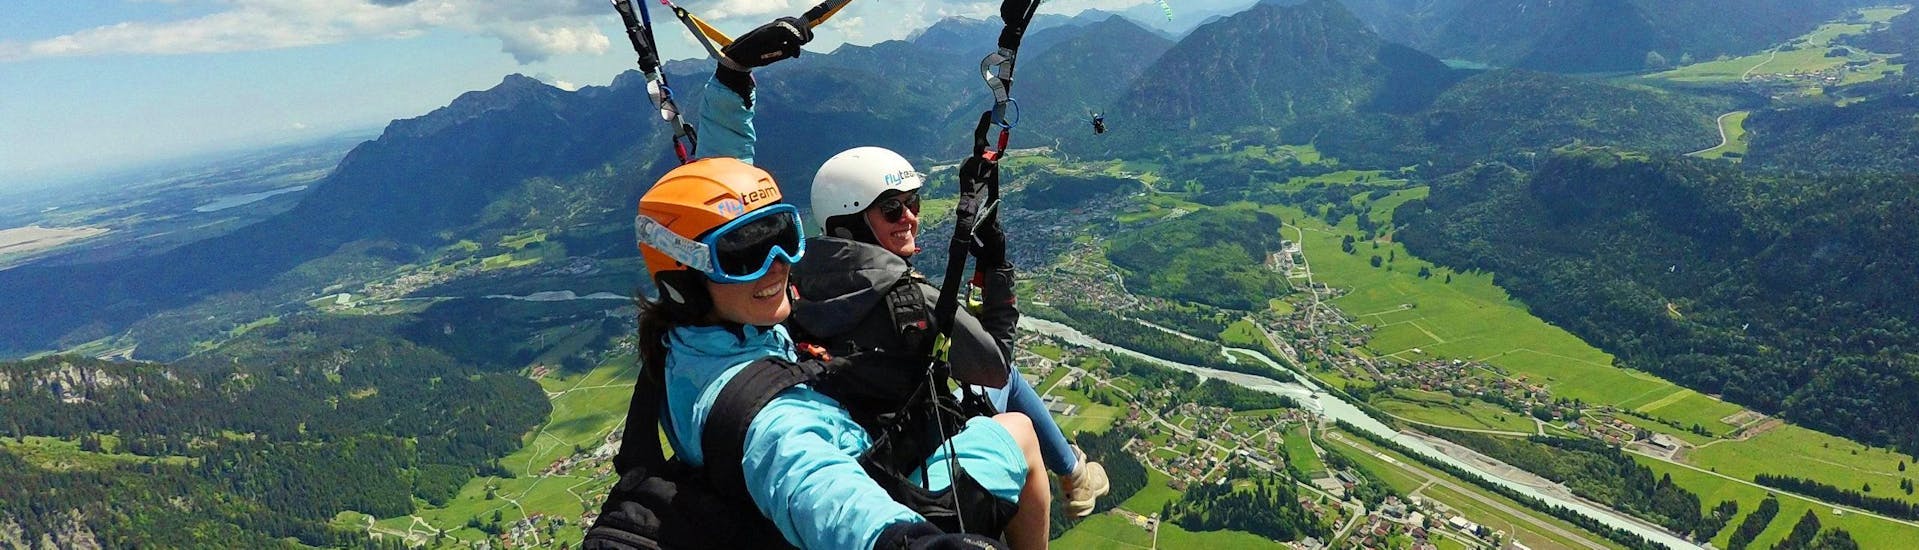 A tandem pilot from FlyTeam and her passenger are soaring high above Reutte in Tyrol during the Tandem Paragliding "Panorama" from Hahnenkamm.